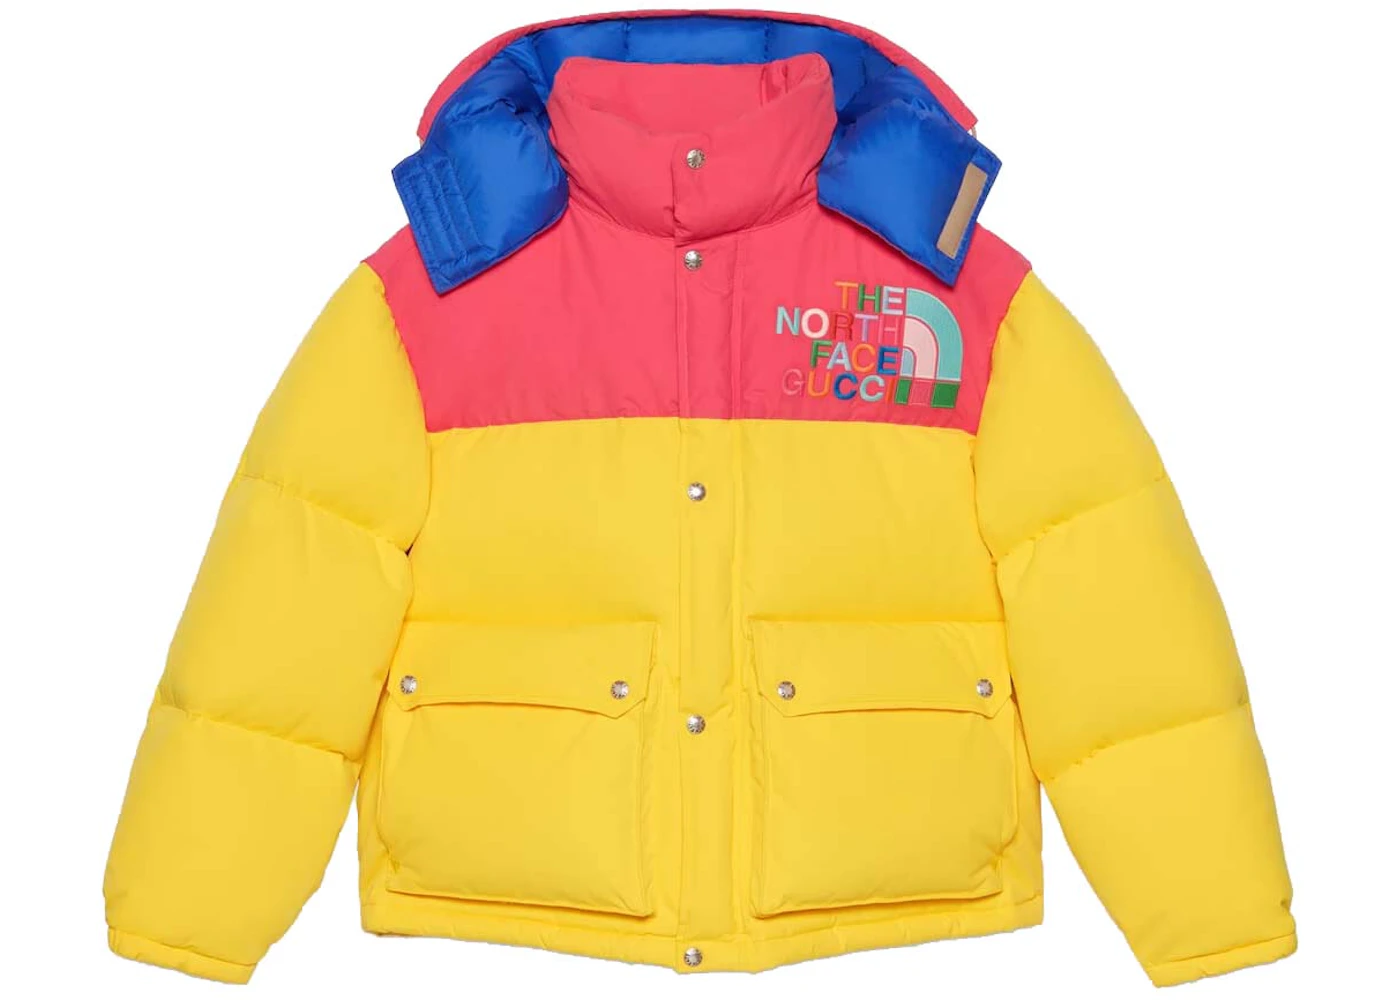 Gucci x The North Face Down Jacket Yellow/Multicolor - FW22 - US